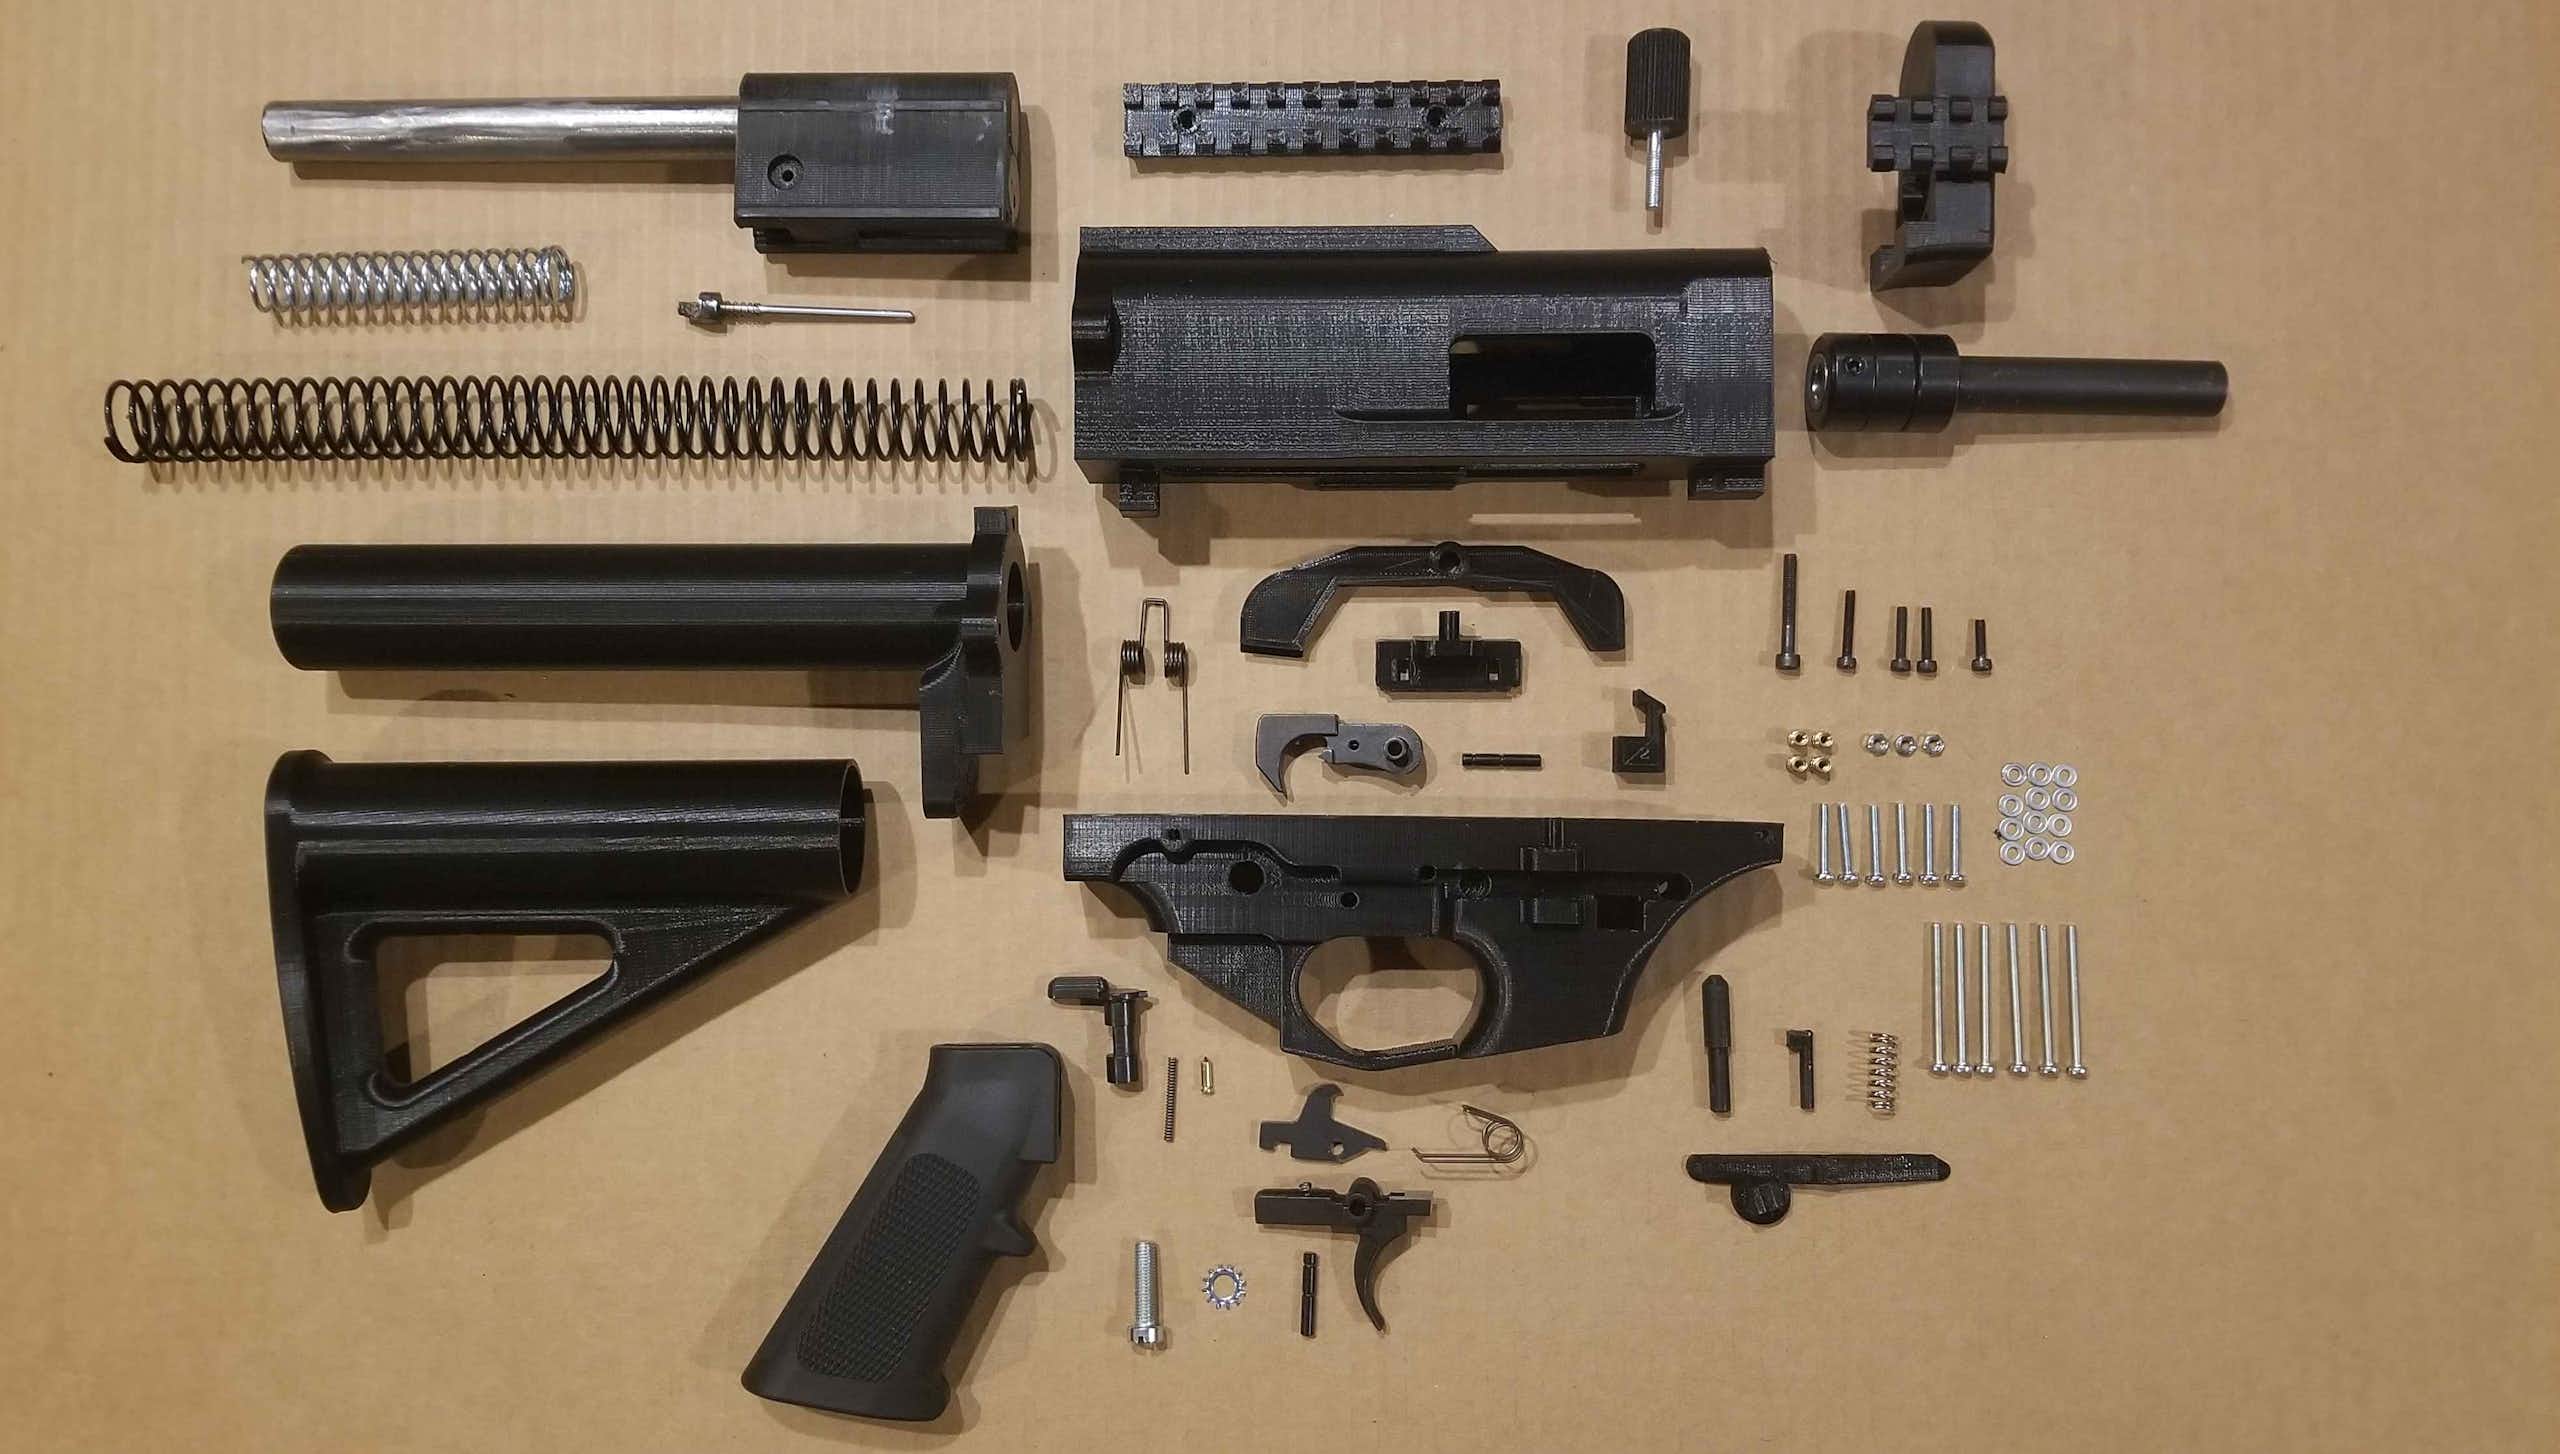 Disassembled components of the FGC-9 shadow gun.